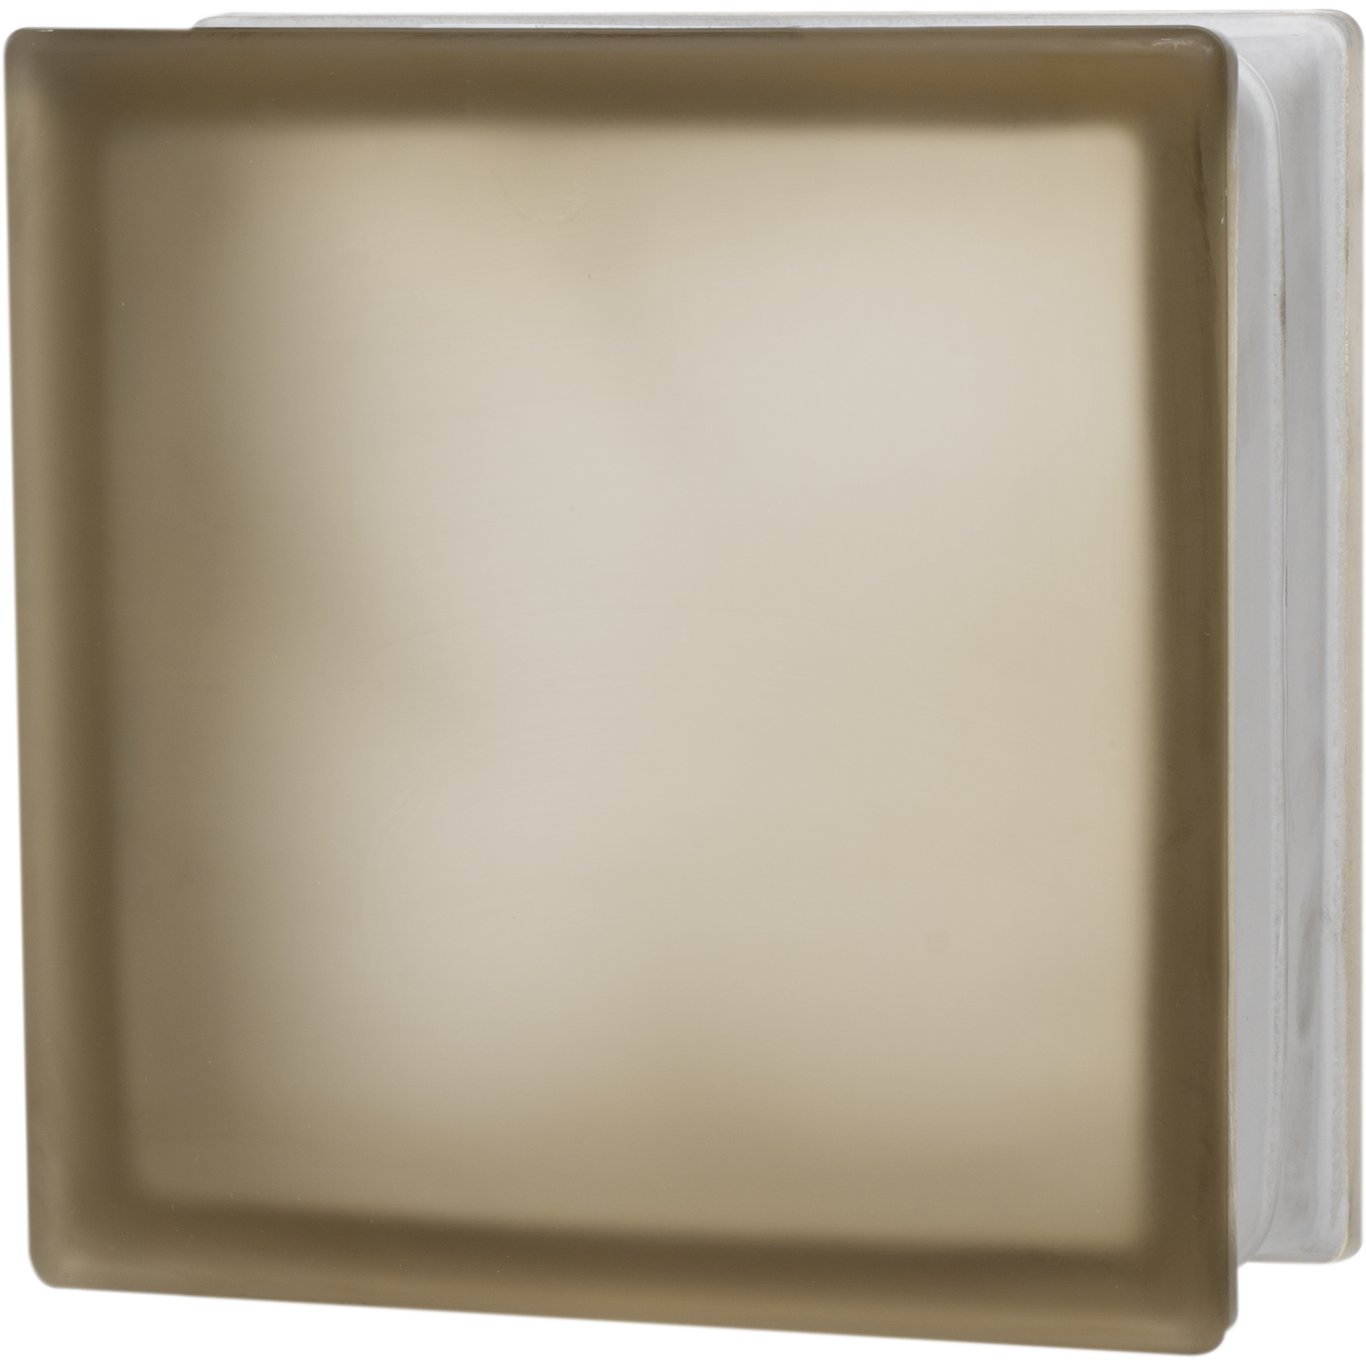 GLASS BLOCK - CLOUDY BROWN MISTY